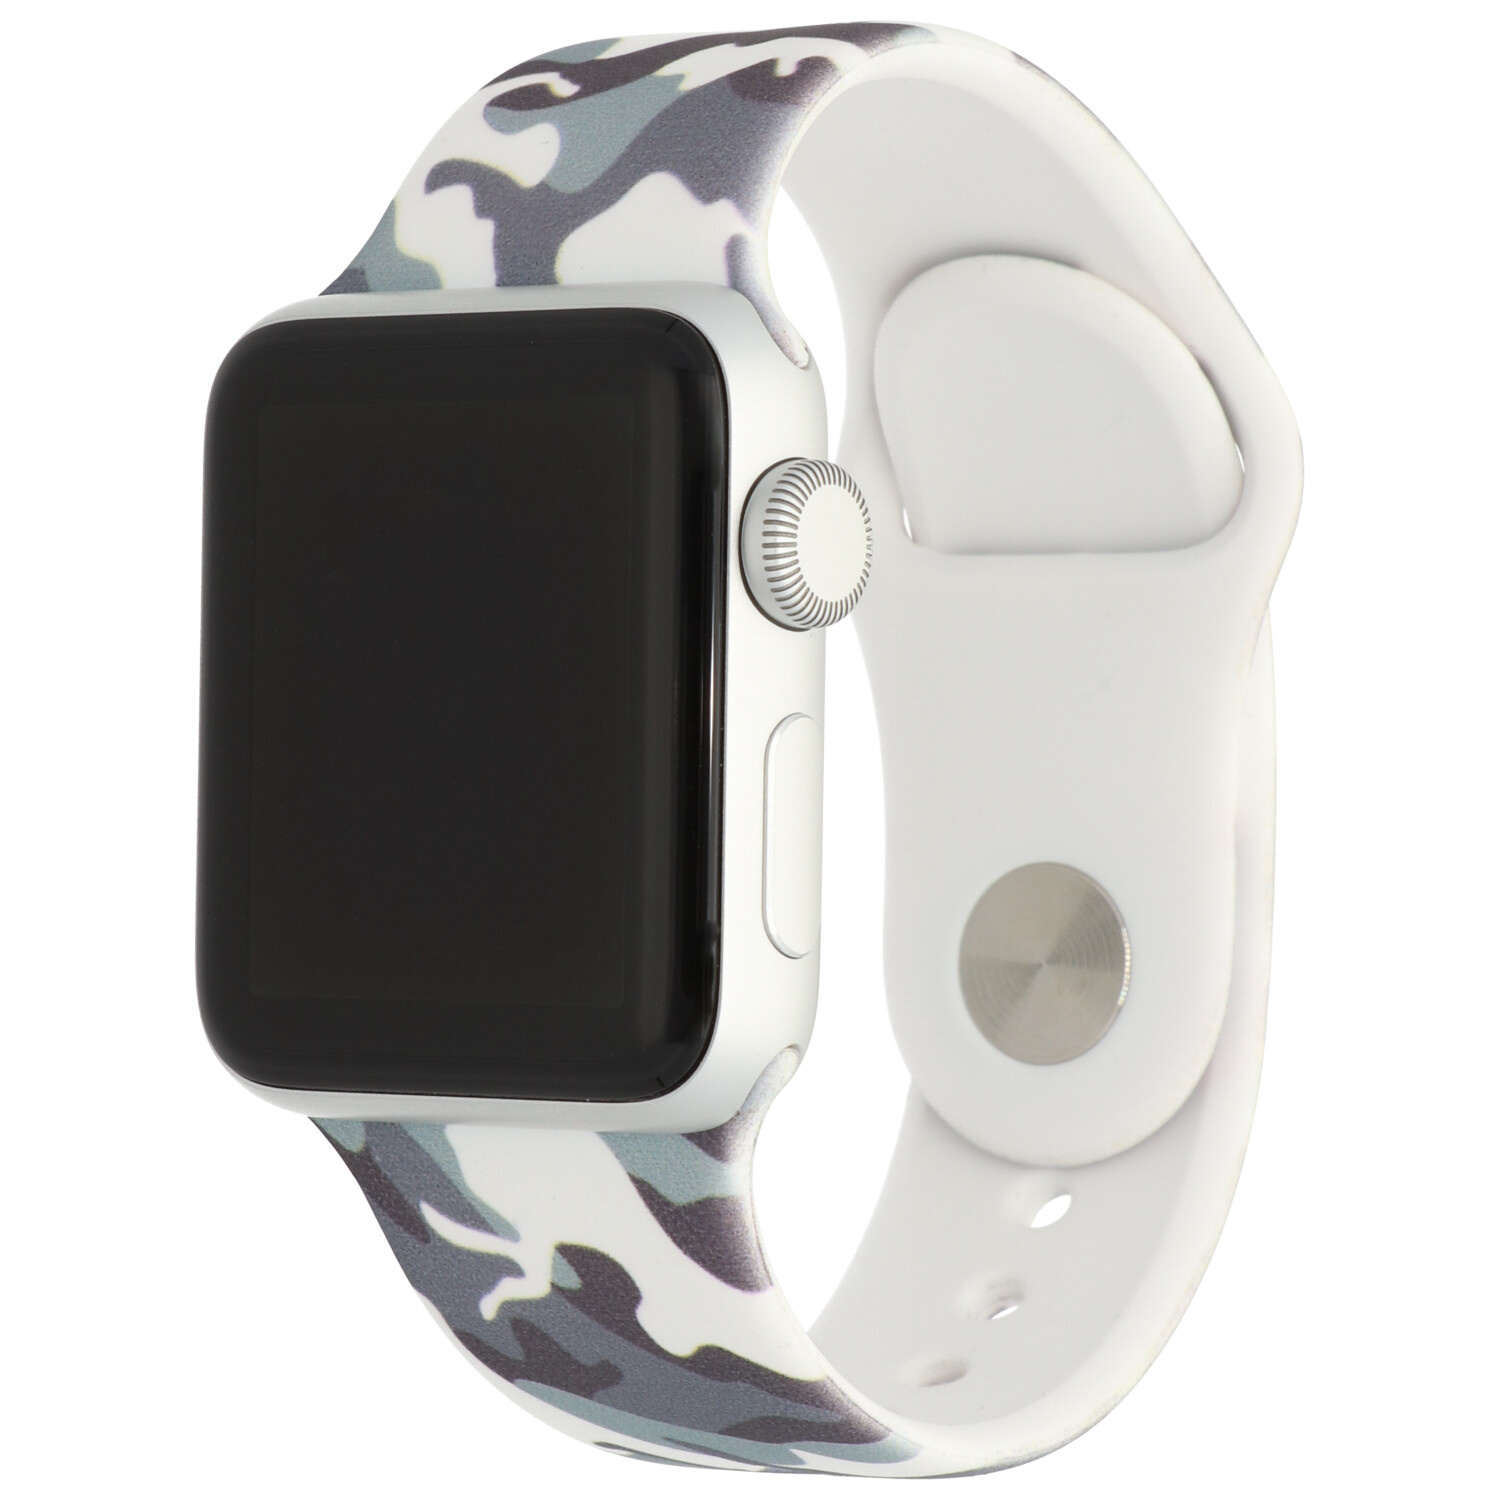 Apple Watch print sport band - camouflage